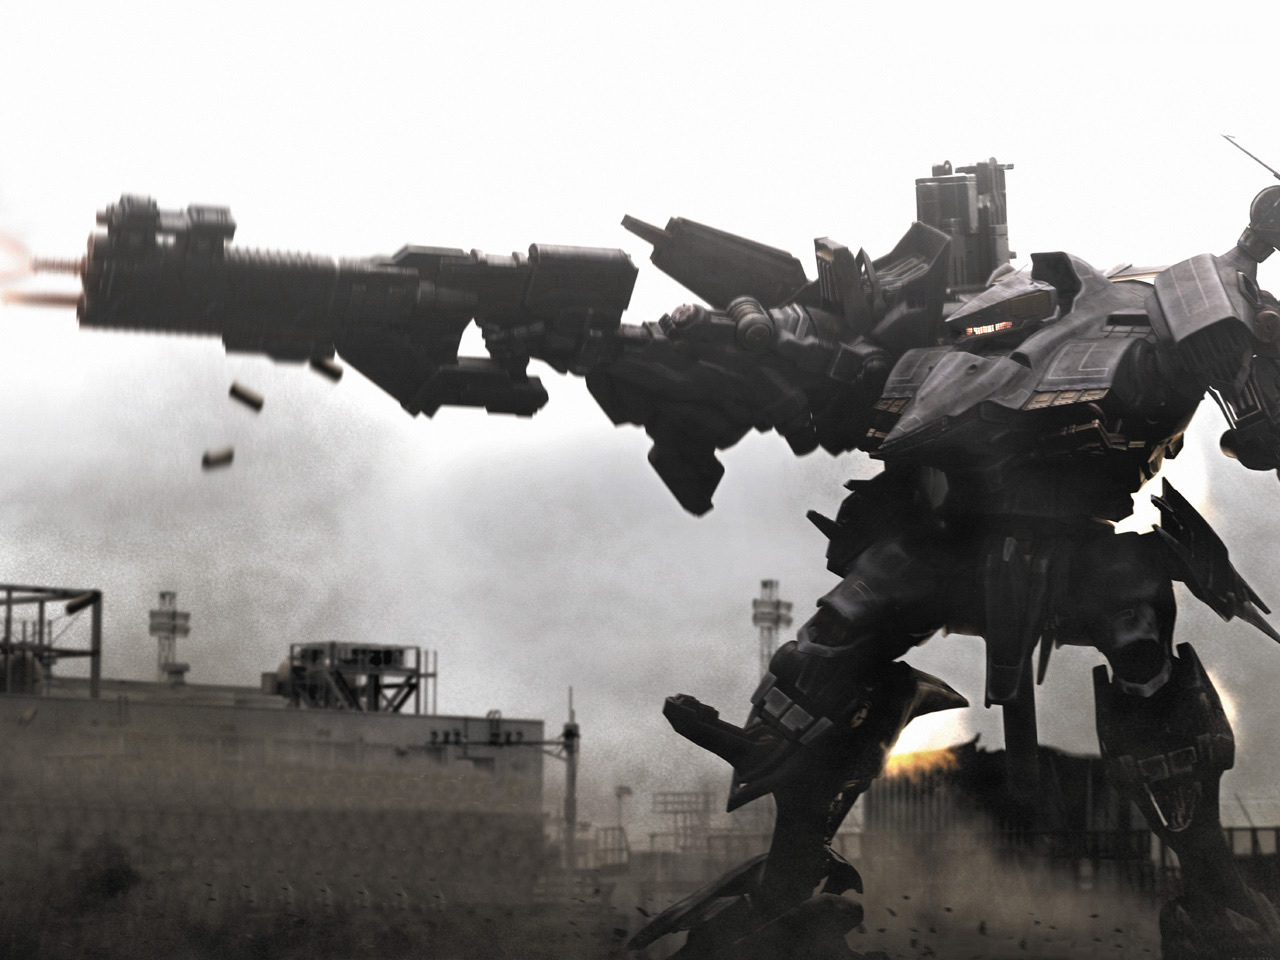 download armored core 5 ps5